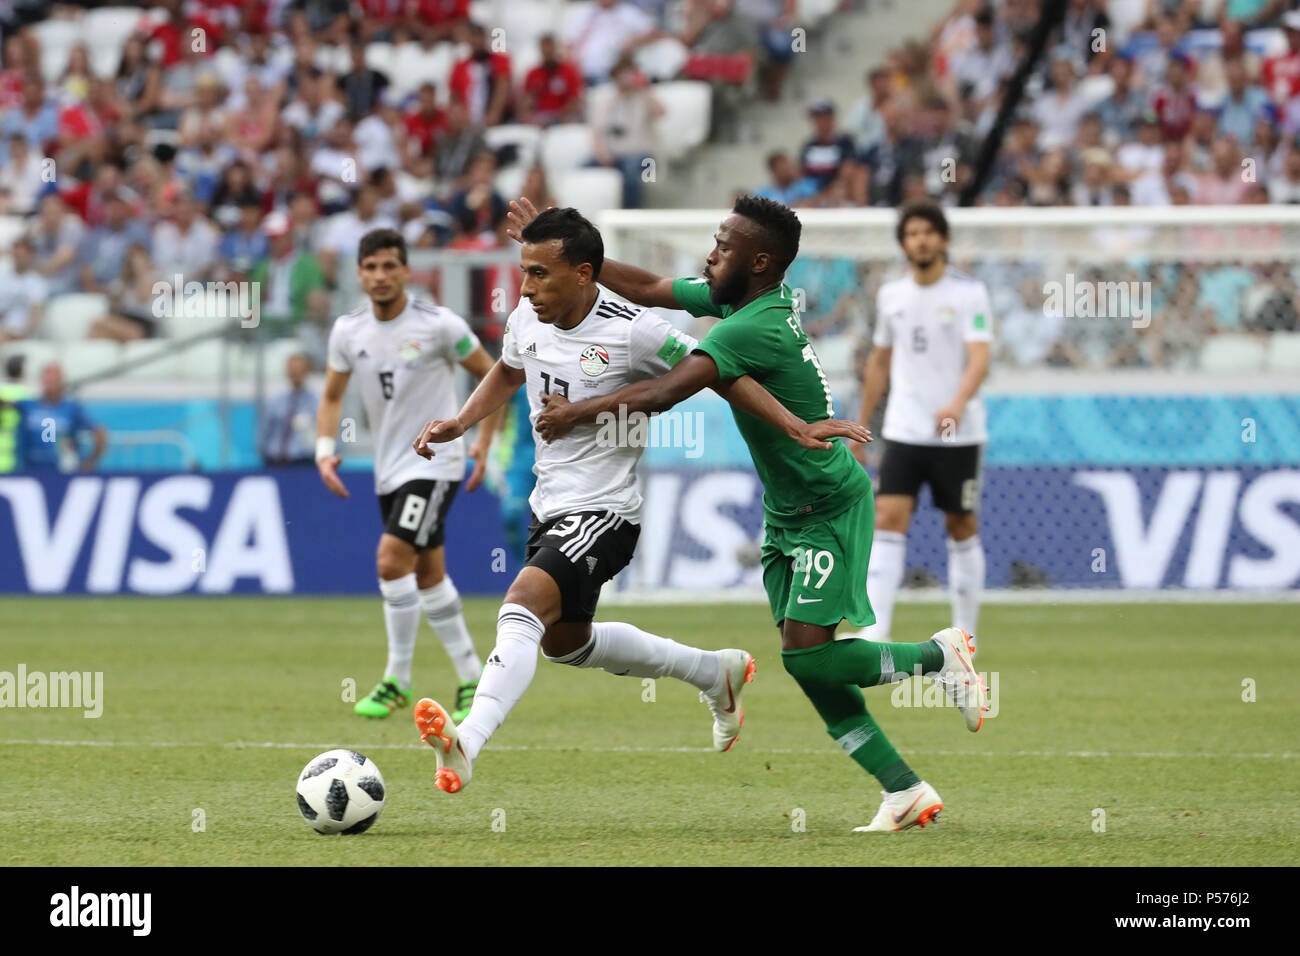 Volgograd, Russia. 25th June, 2018. Egypt's Mohamed Abdel-Shafy (L) battles for the ball with Saudi Arabia's Fahad Al-Muwallad during the FIFA World Cup 2018 Group A soccer match between Saudi Arabia and Egypt at the Volgograd Arena in Volgograd, Russia, 25 June 2018. Credit: Ahmed Ramadan/dpa/Alamy Live News Stock Photo